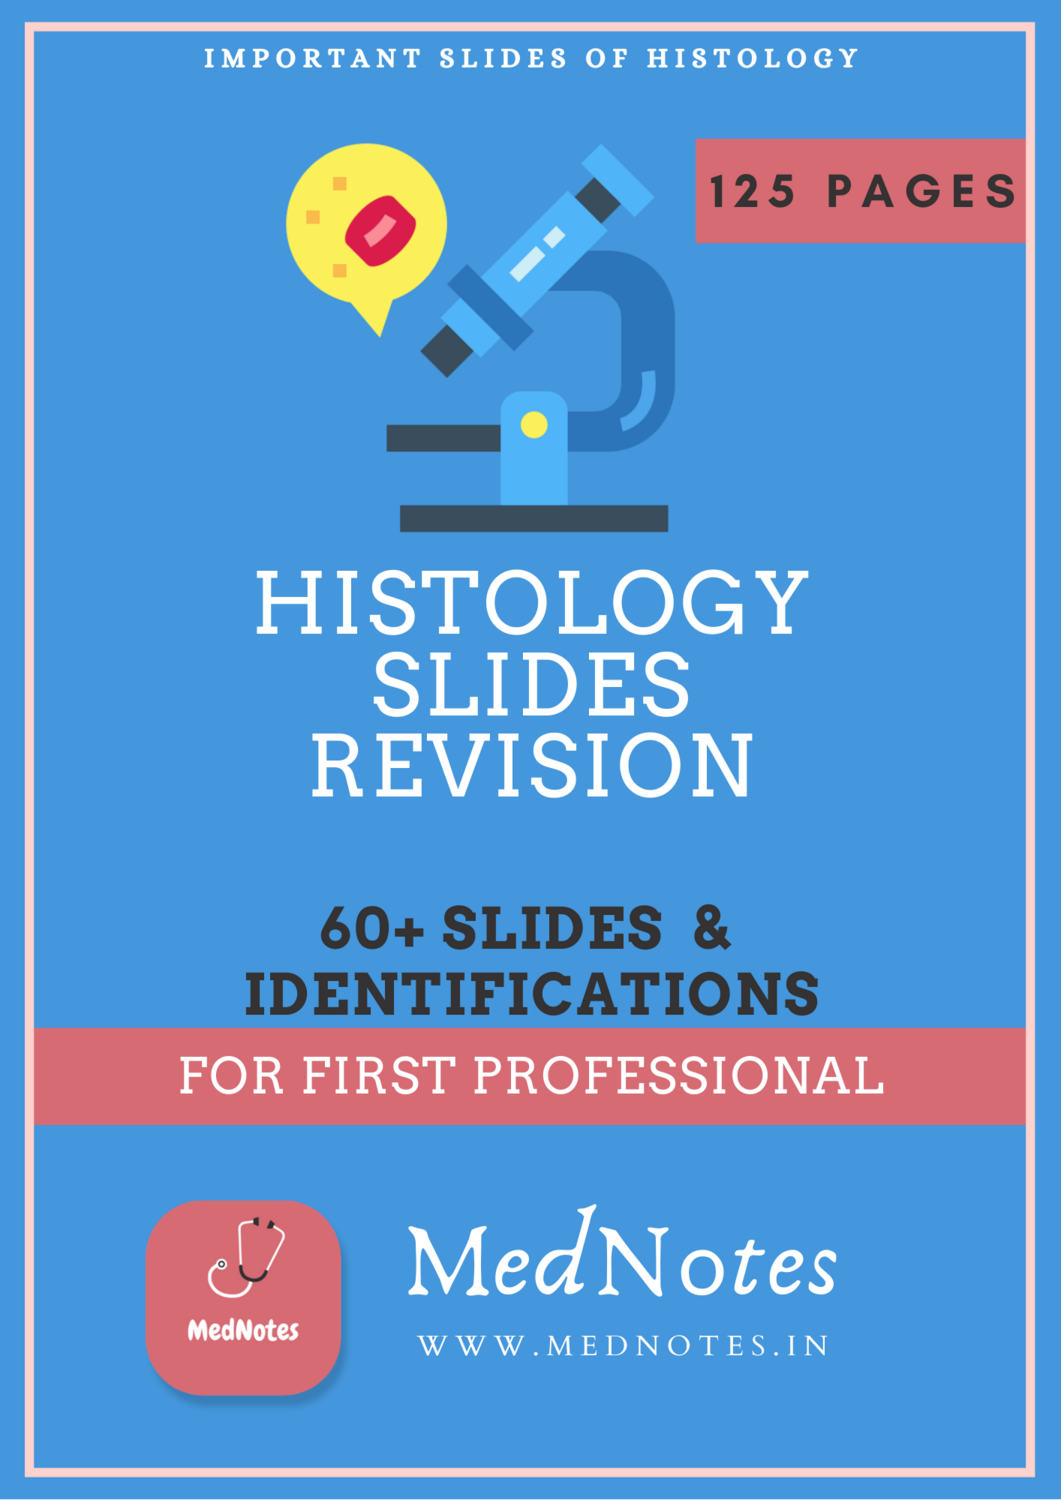 Histology Slides Revision - For First Professional [E-book]